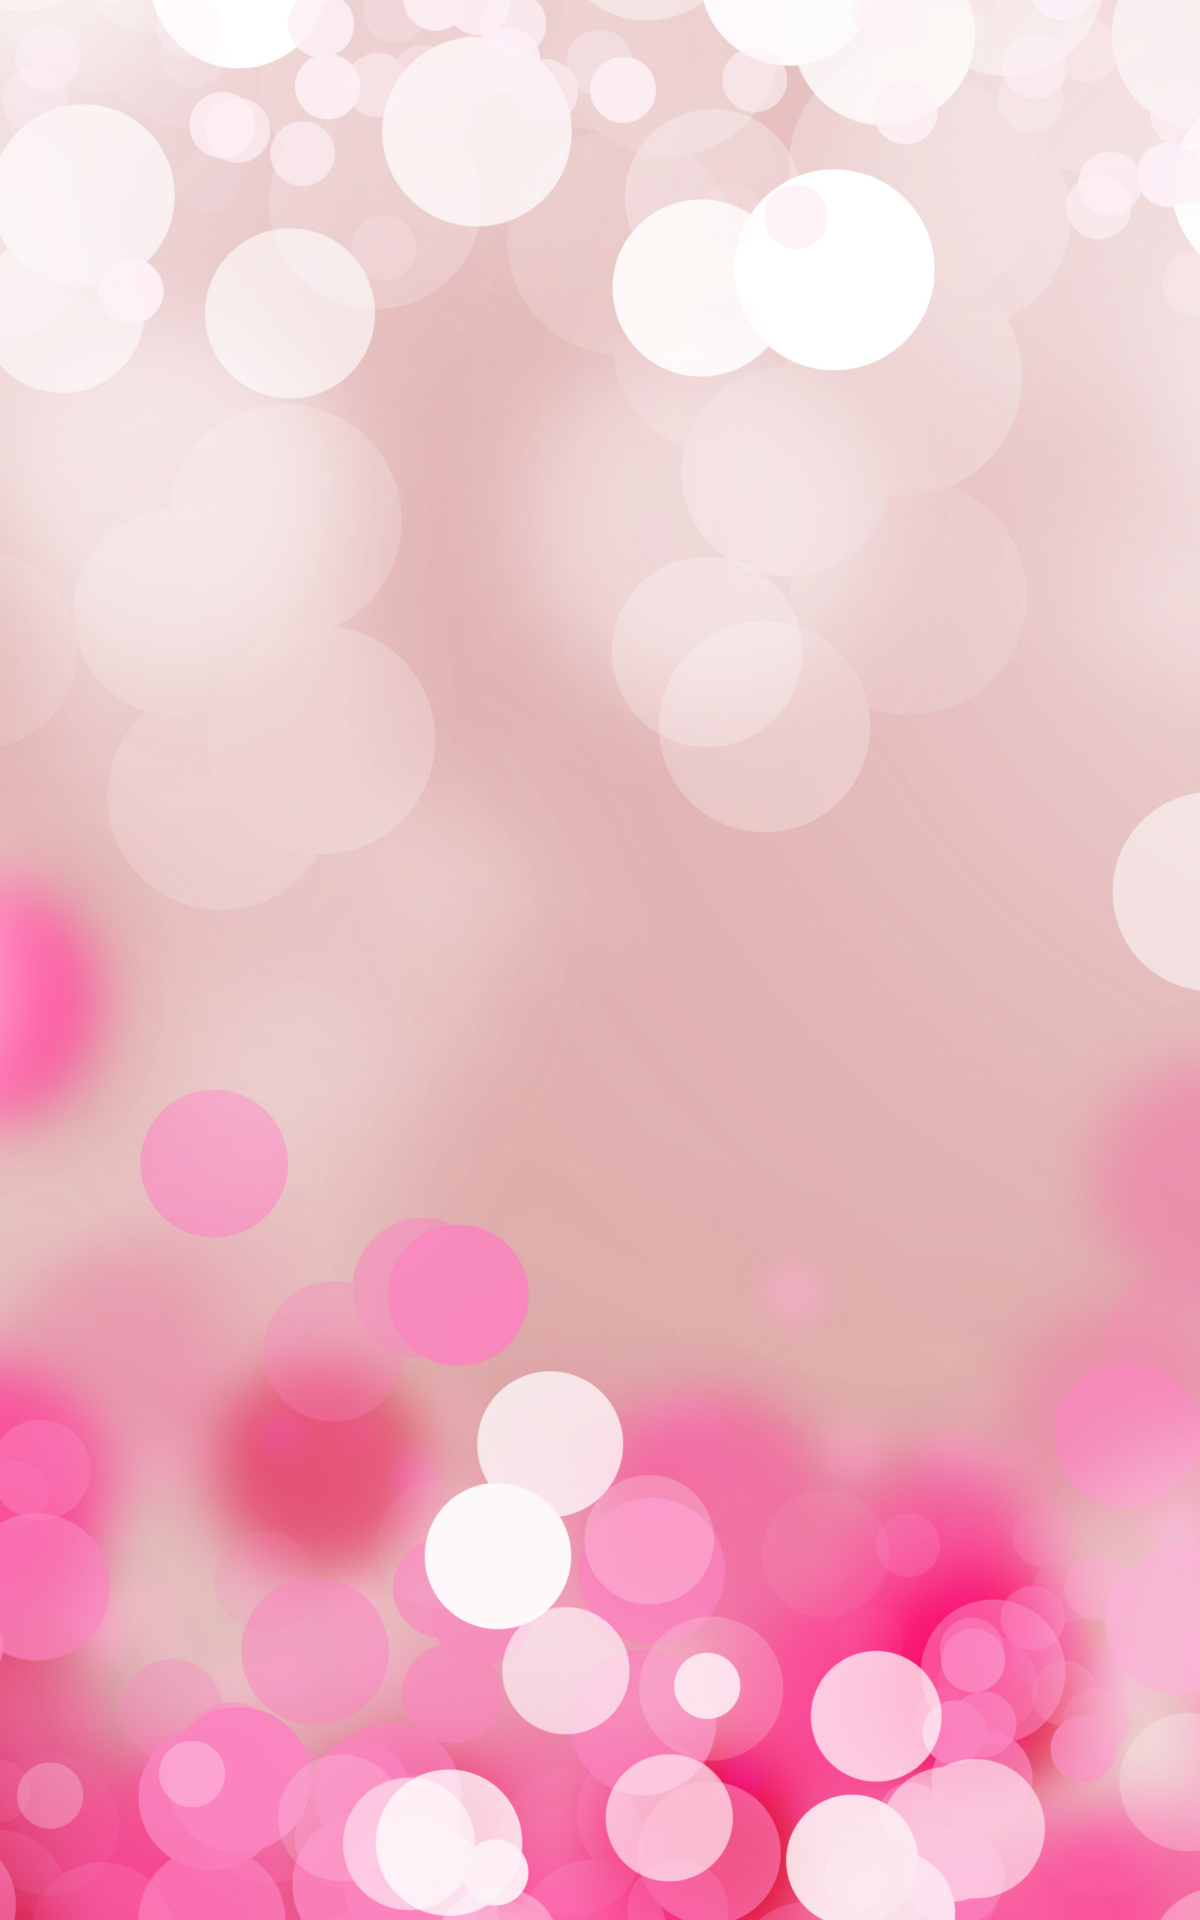 Free download Light Pink Background wallpaper wallpaper HD background desktop [5000x3750] for your Desktop, Mobile & Tablet. Explore Pink and Gold Floral Wallpaper. Pink Wallpaper, Pink and Black Wallpaper